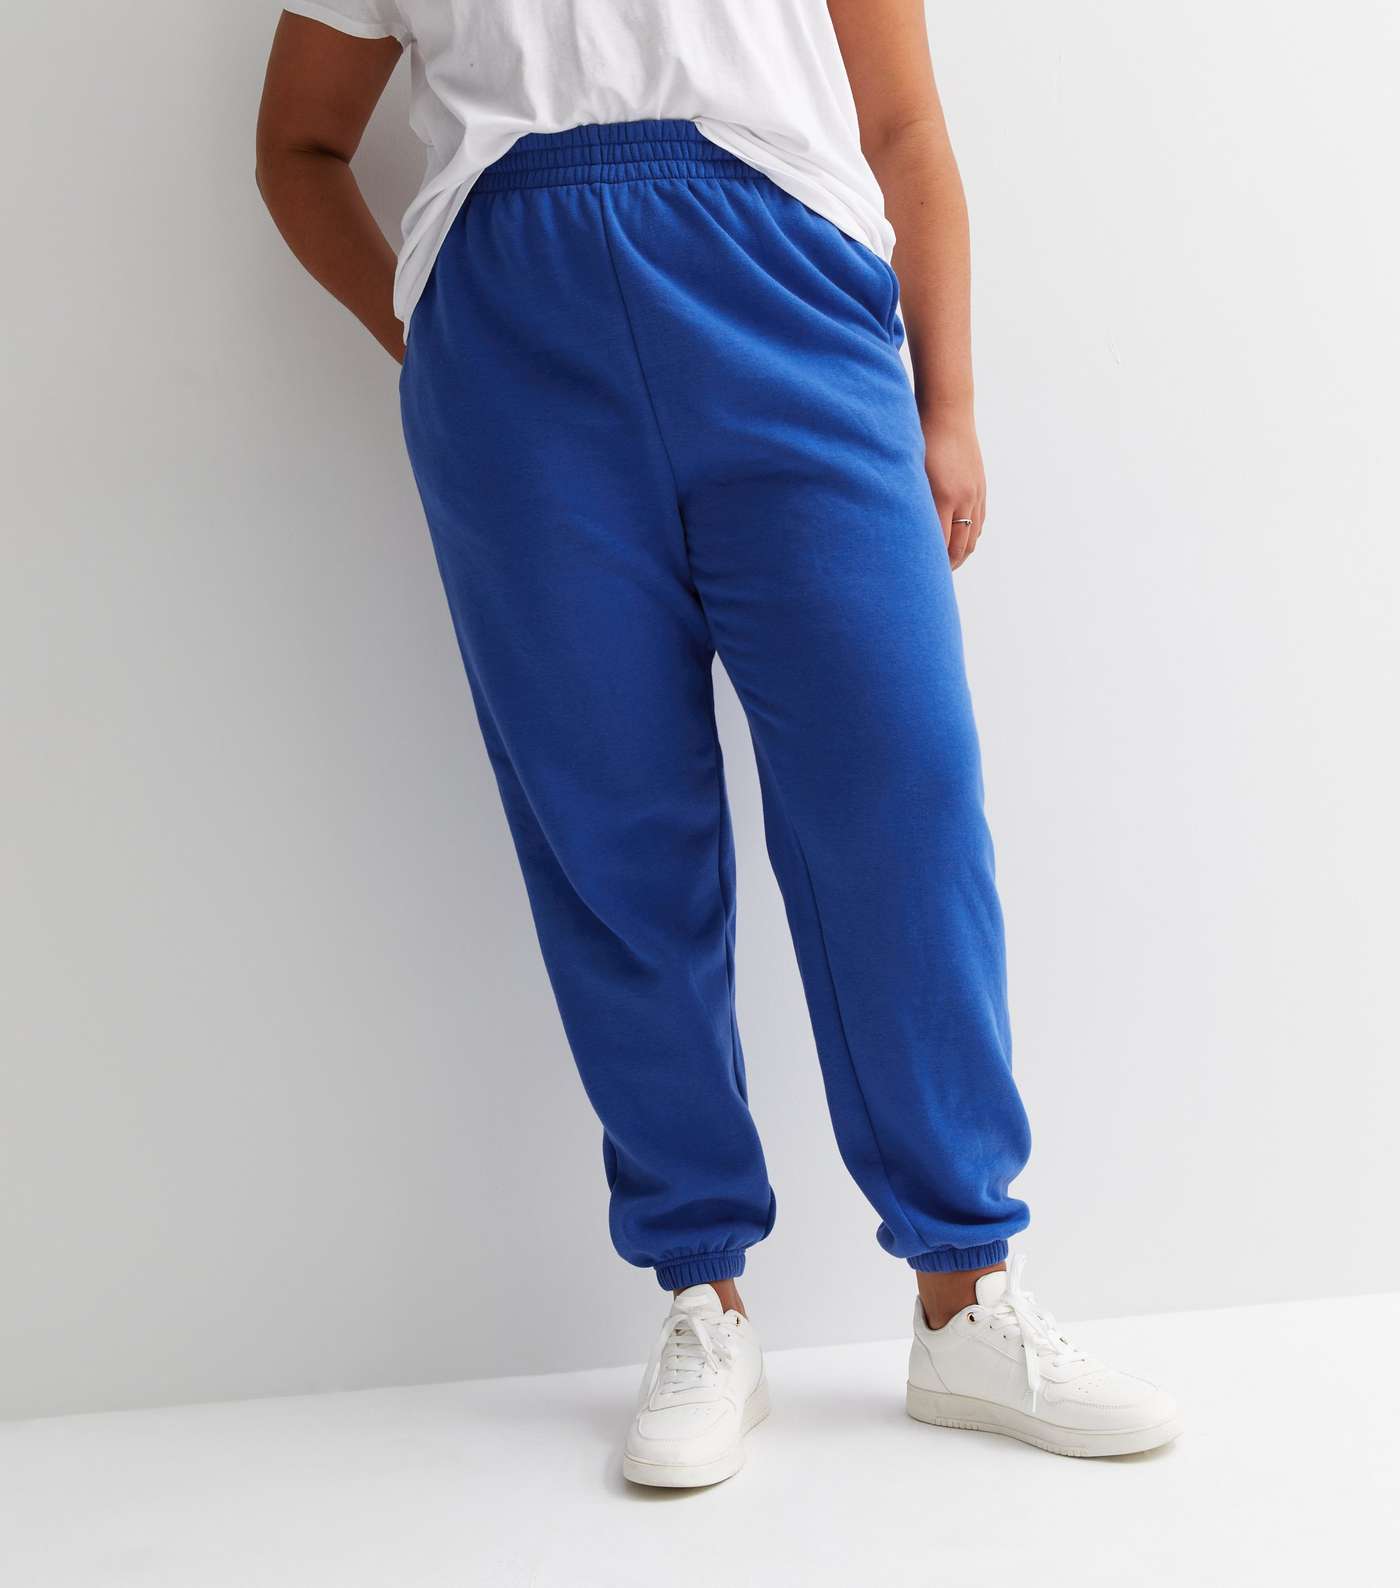 Curves Bright Blue Jersey Cuffed Joggers Image 2